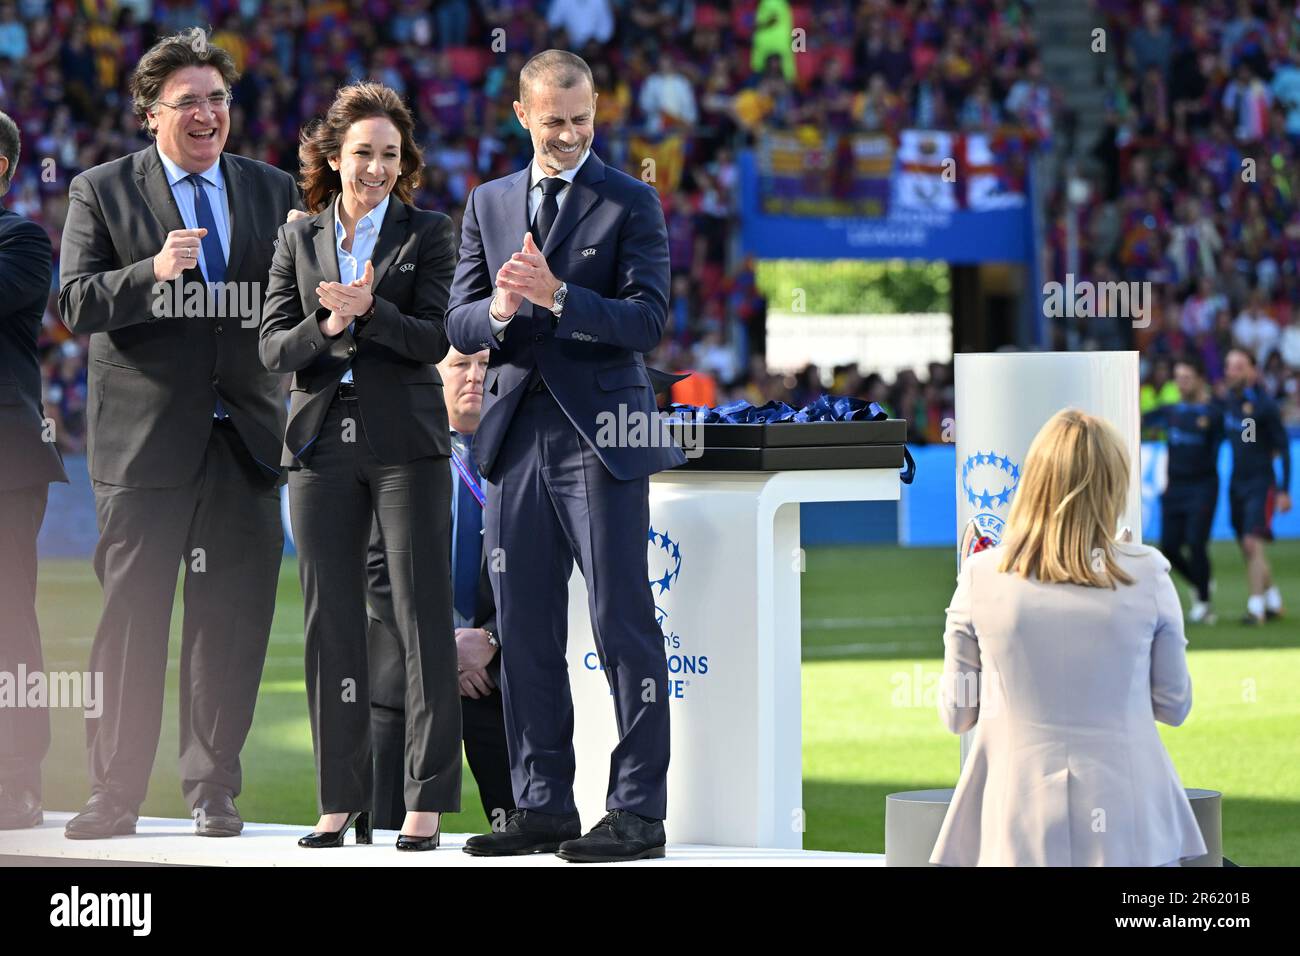 Theodore Theodoridis , Nadine Kessler and Aleksander Ceferin pictured watching Dutch Sarina Wiegman bring the trophee cup during a female soccer game between FC Barcelona Femeni and VFL Wolfsburg, at the final of the 2022-2023 Uefa Women’s Champions League competition , on  Saturday 3 June 2023  in Eindhoven , The Netherlands . PHOTO SPORTPIX | David Catry Stock Photo